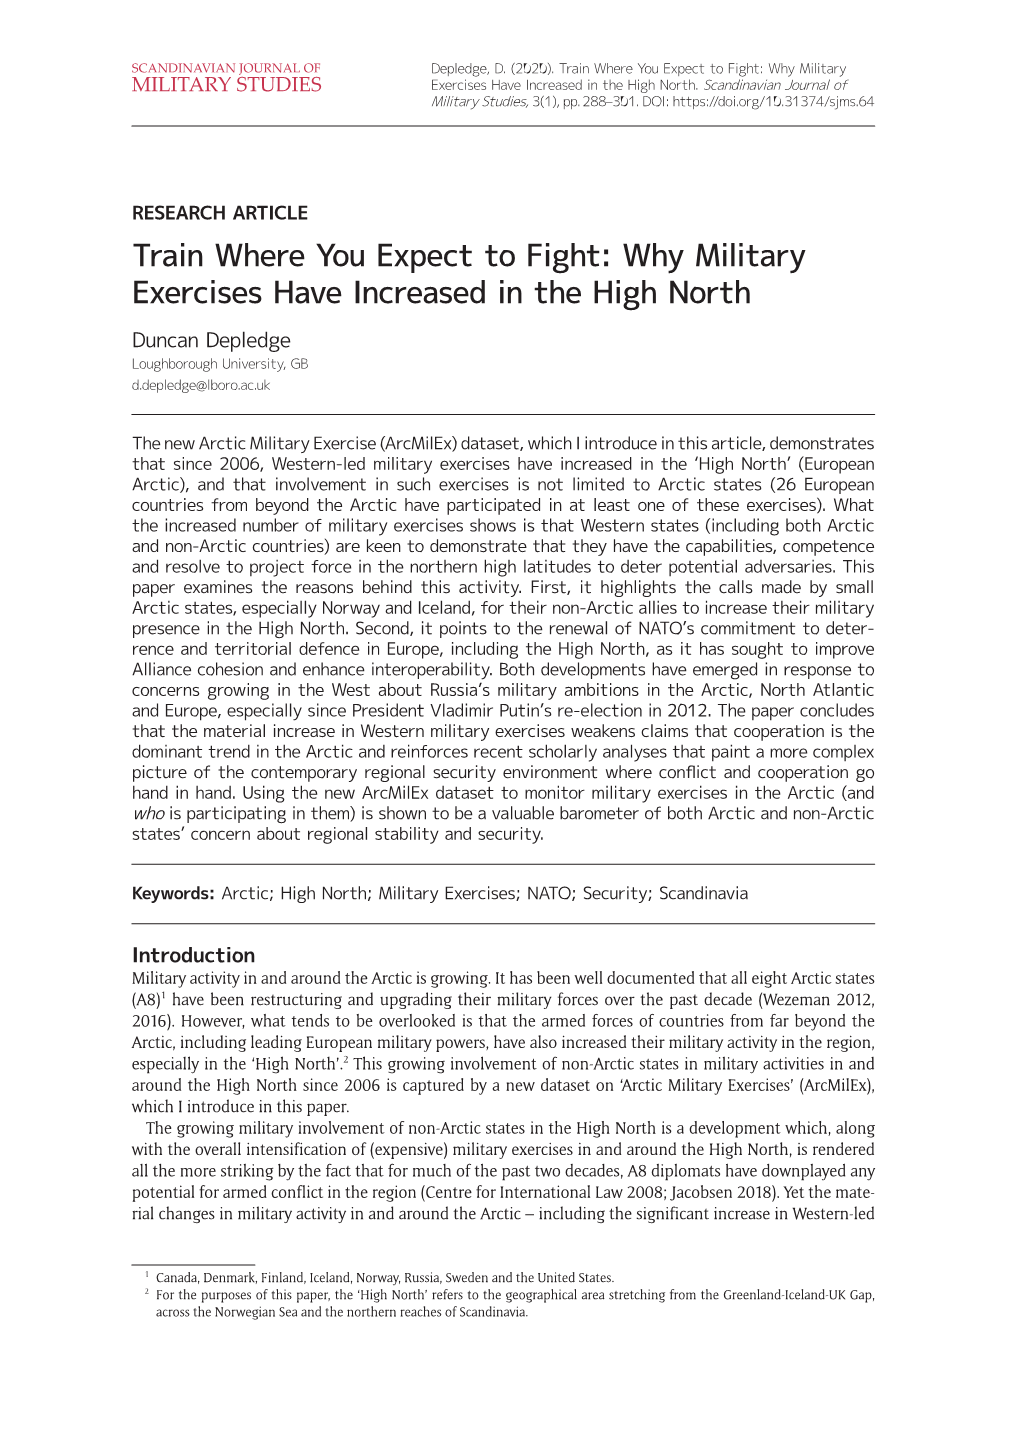 Why Military Exercises Have Increased in the High North Duncan Depledge Loughborough University, GB D.Depledge@Lboro.Ac.Uk